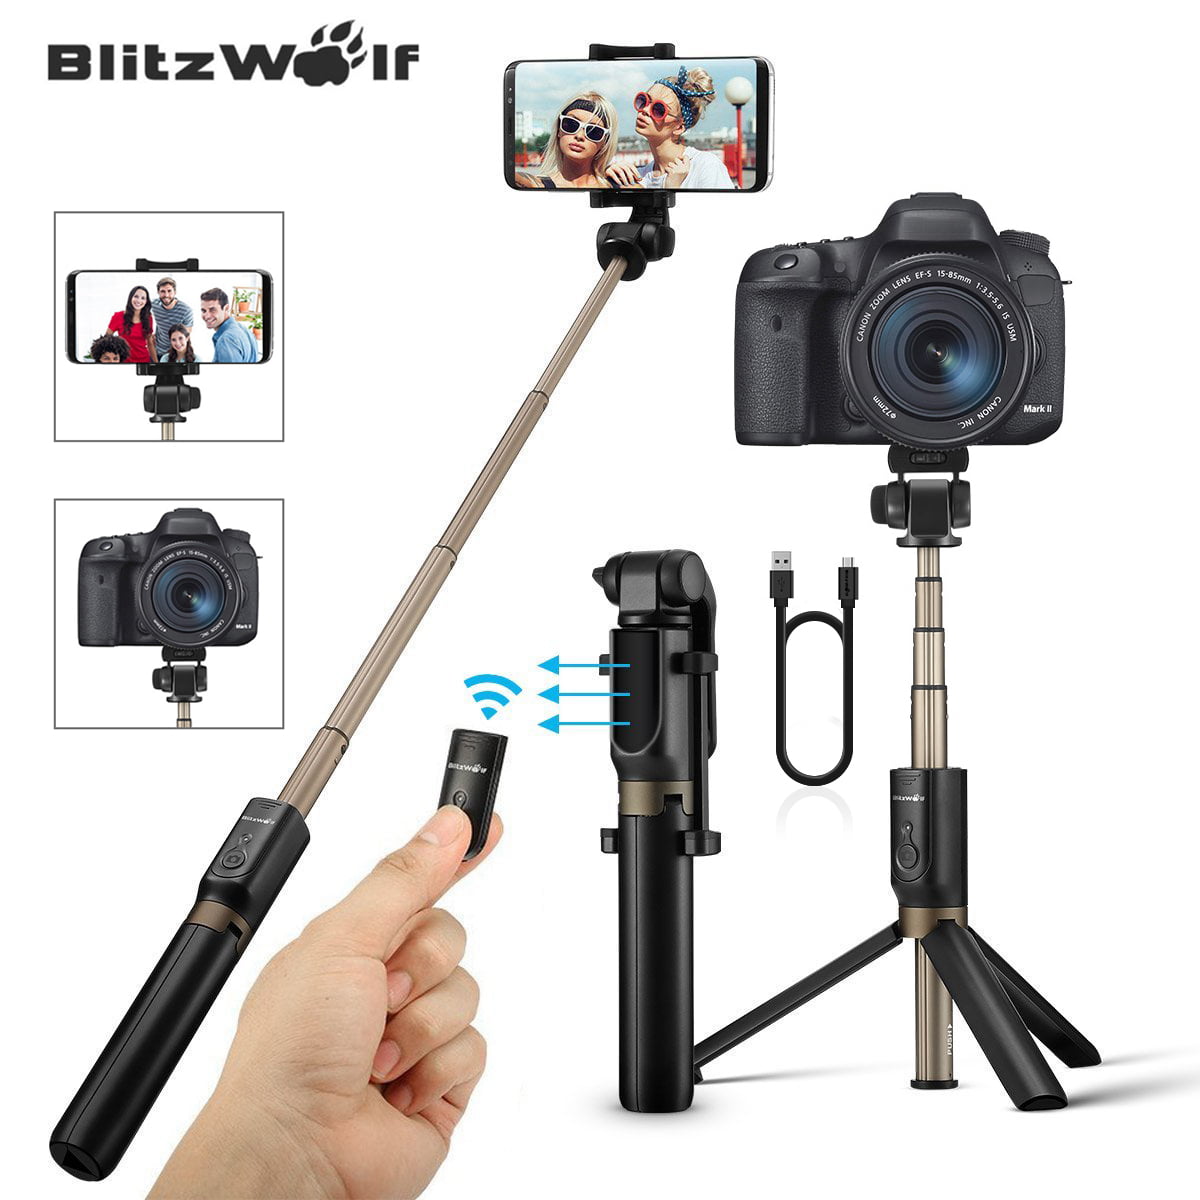 BlitzWolf Portable Bluetooth Handheld Extendable Folding Tripod Monopod Selfie Stick with Remote Controller Shutter，for Sport Action Camera 3.5-6 inch Screen Smart Mobile Phone